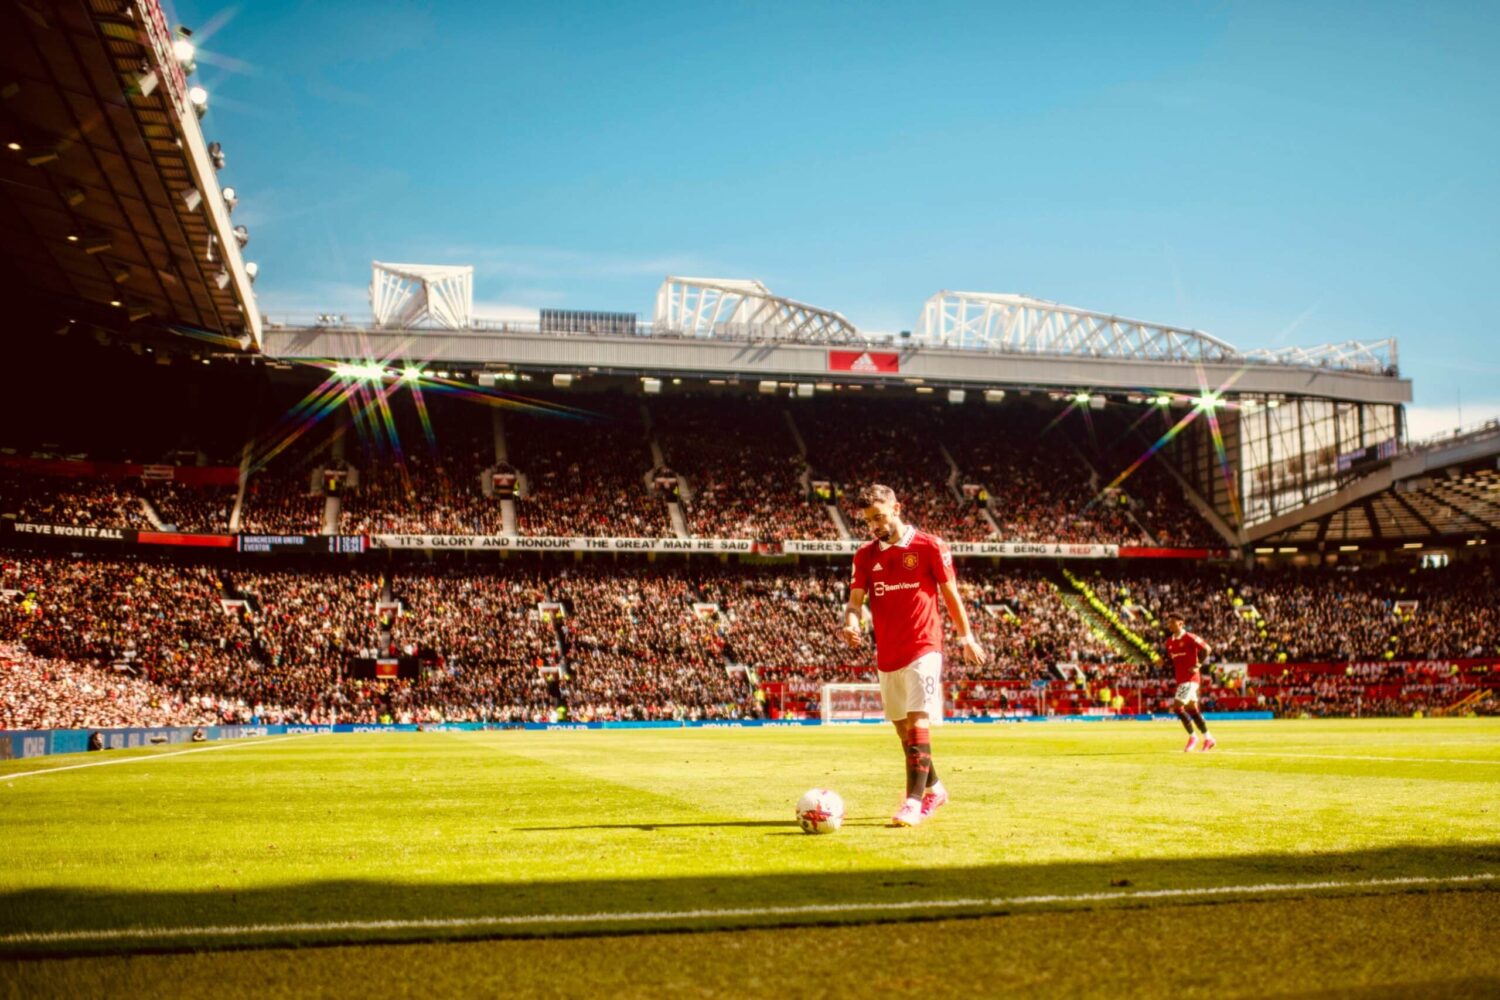 A view of Old Trafford with Manchester United player Bruno Fernandes in the foreground.